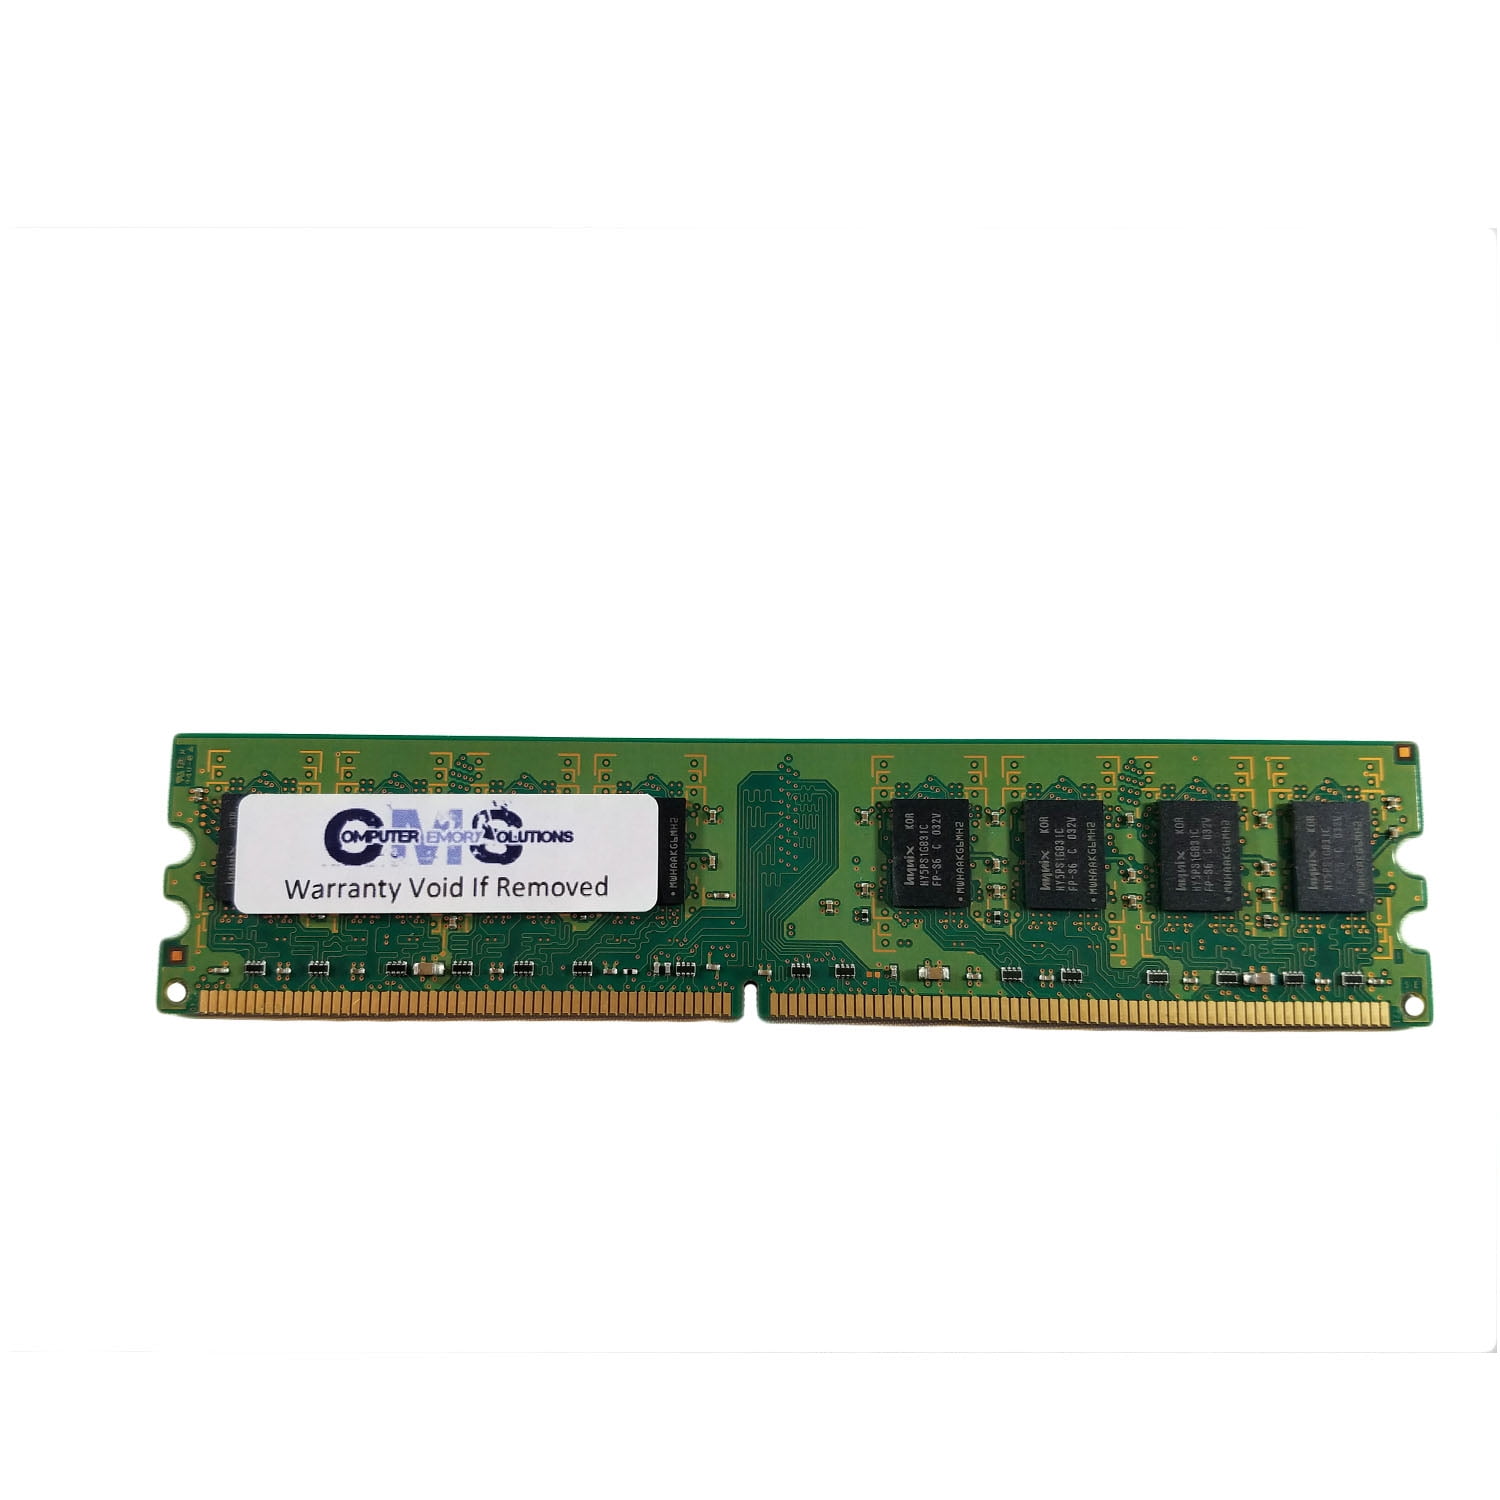 CMS 2GB (1X2GB) DDR2 4200 533MHZ NON ECC DIMM Memory Ram Upgrade Compatible with Acer® Aspire G7700 2Gpu, G7700-494X, M1100, - A87 -